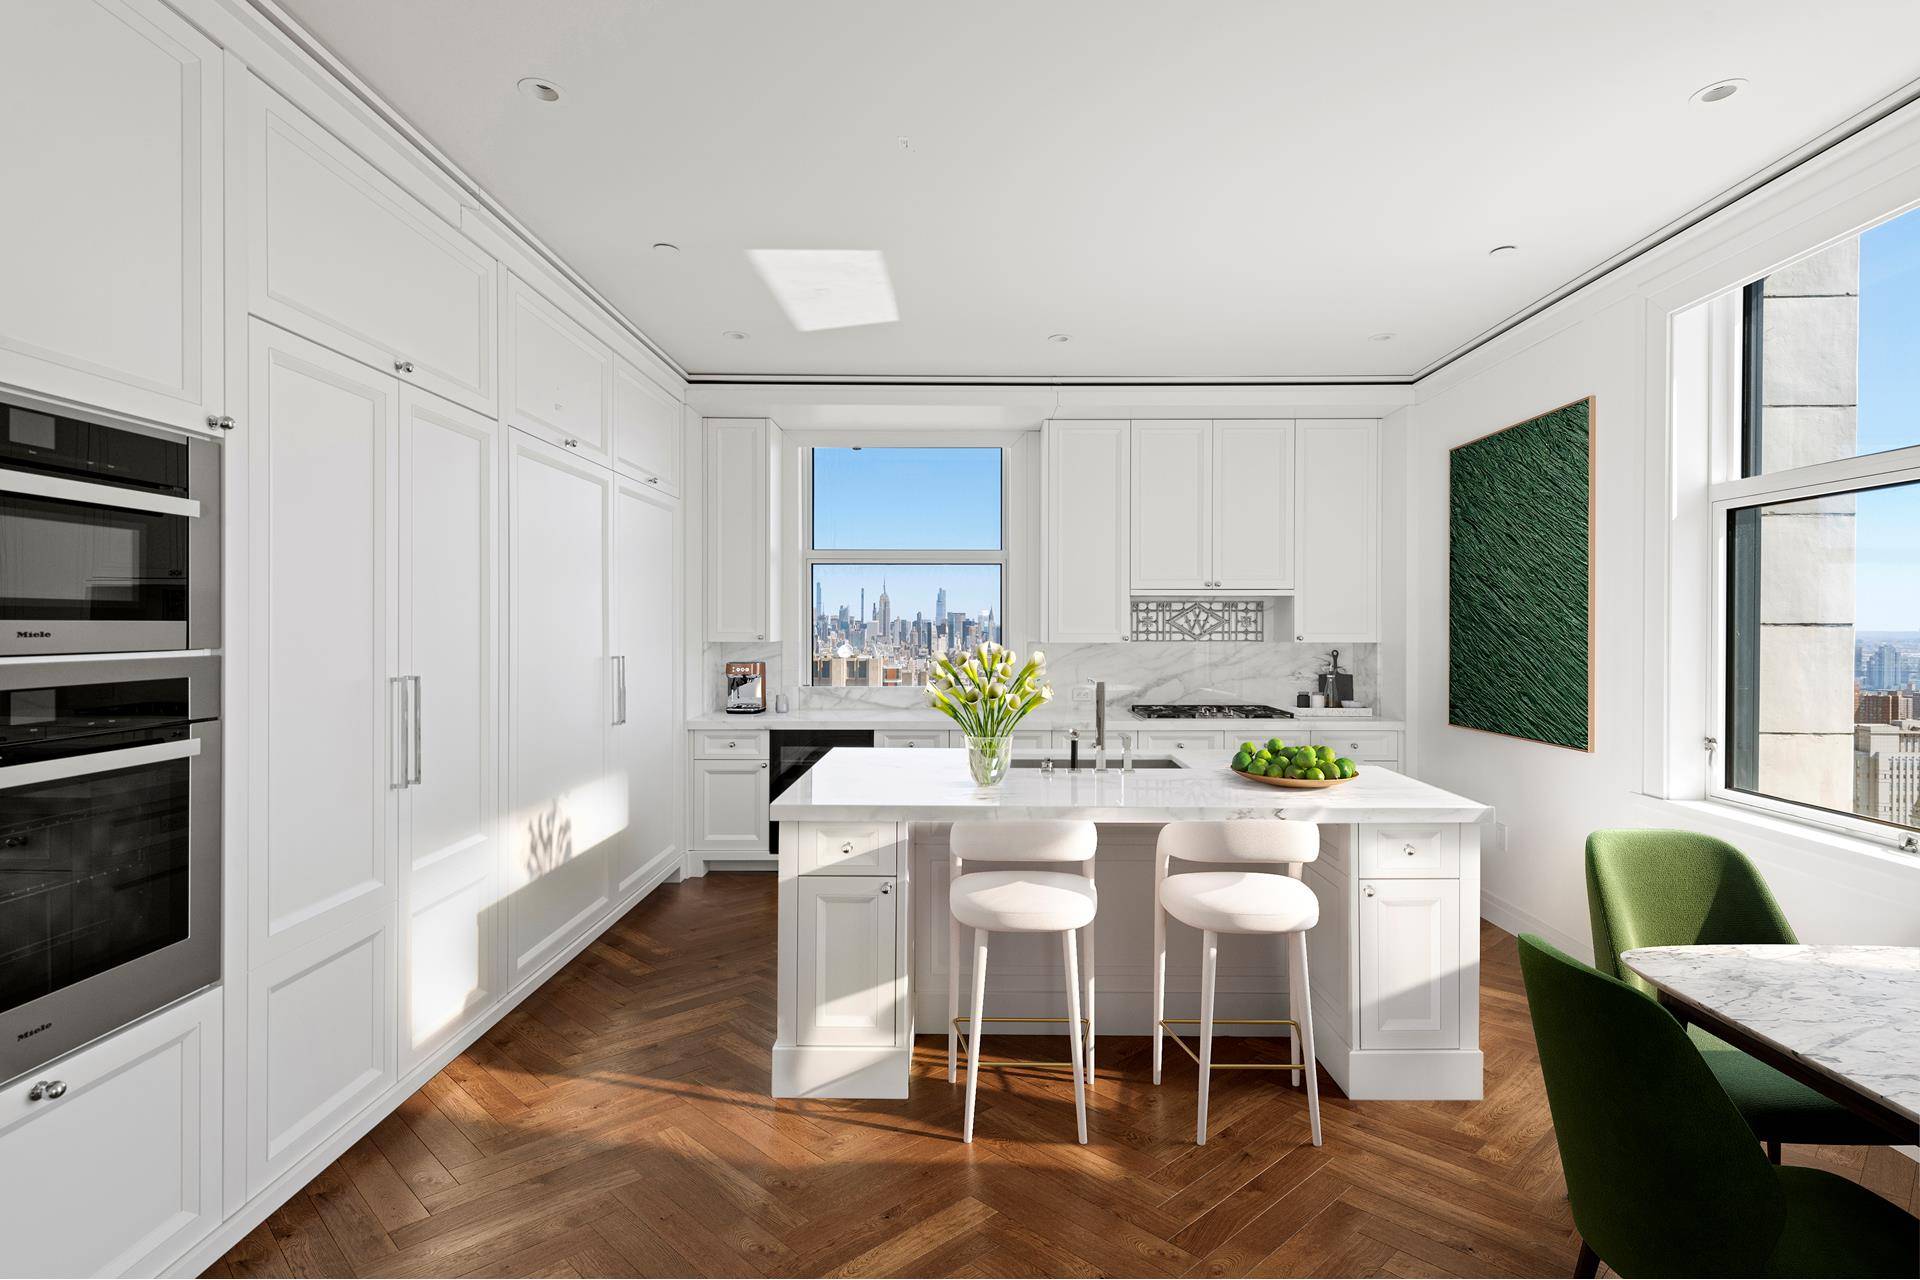 Discover an extraordinary, one of a kind opportunity in Tribeca.